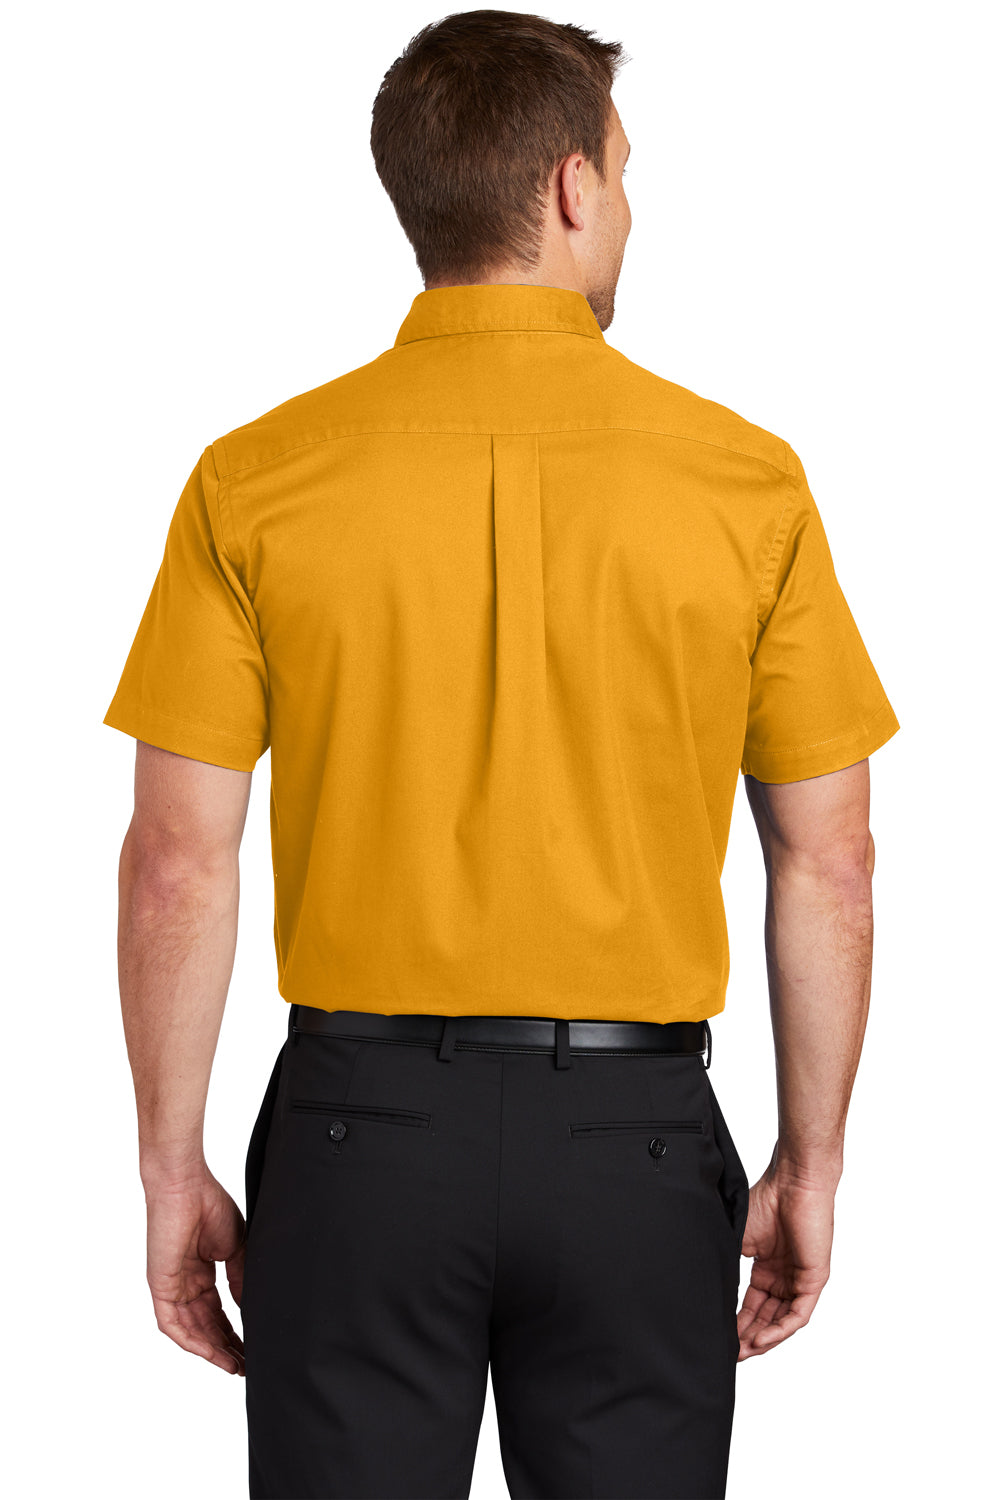 Port Authority S508/TLS508 Mens Easy Care Wrinkle Resistant Short Sleeve Button Down Shirt w/ Pocket Athletic Gold Back